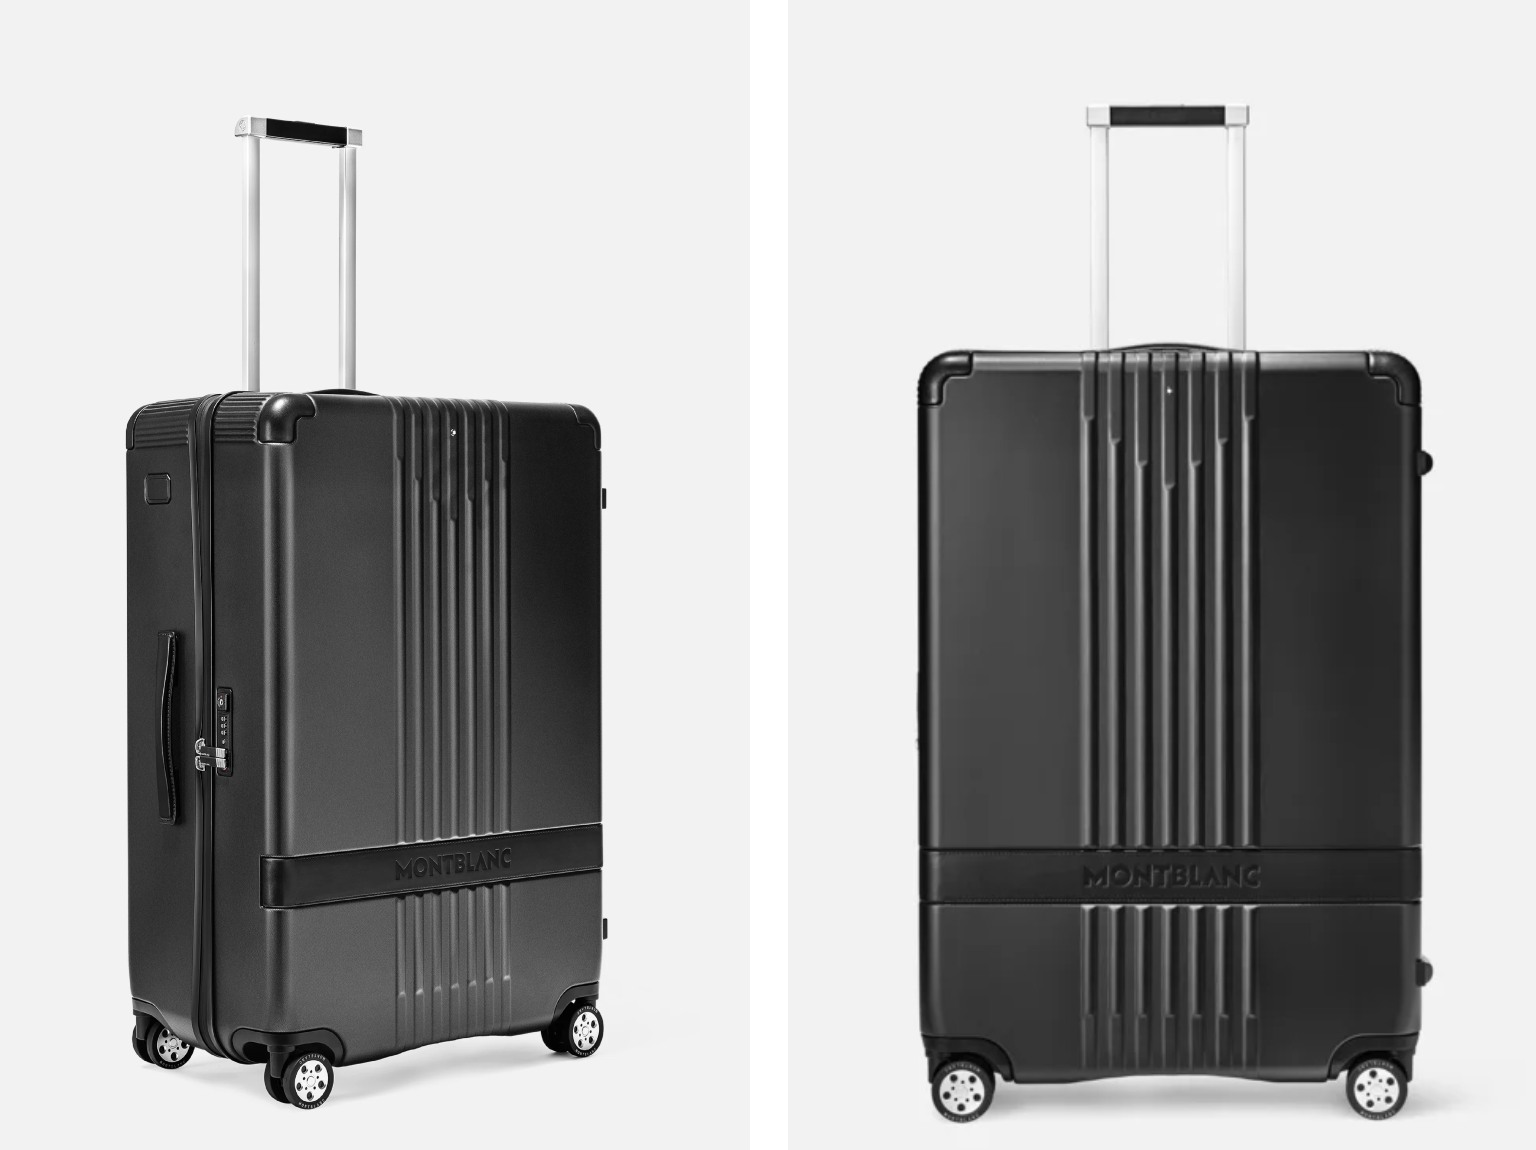 Louis Vuitton Horizon Luggage, For the love of travel. The Louis Vuitton  Horizon rolling luggage collection was designed by Marc Newson with  frequent fliers in mind. Find out more at